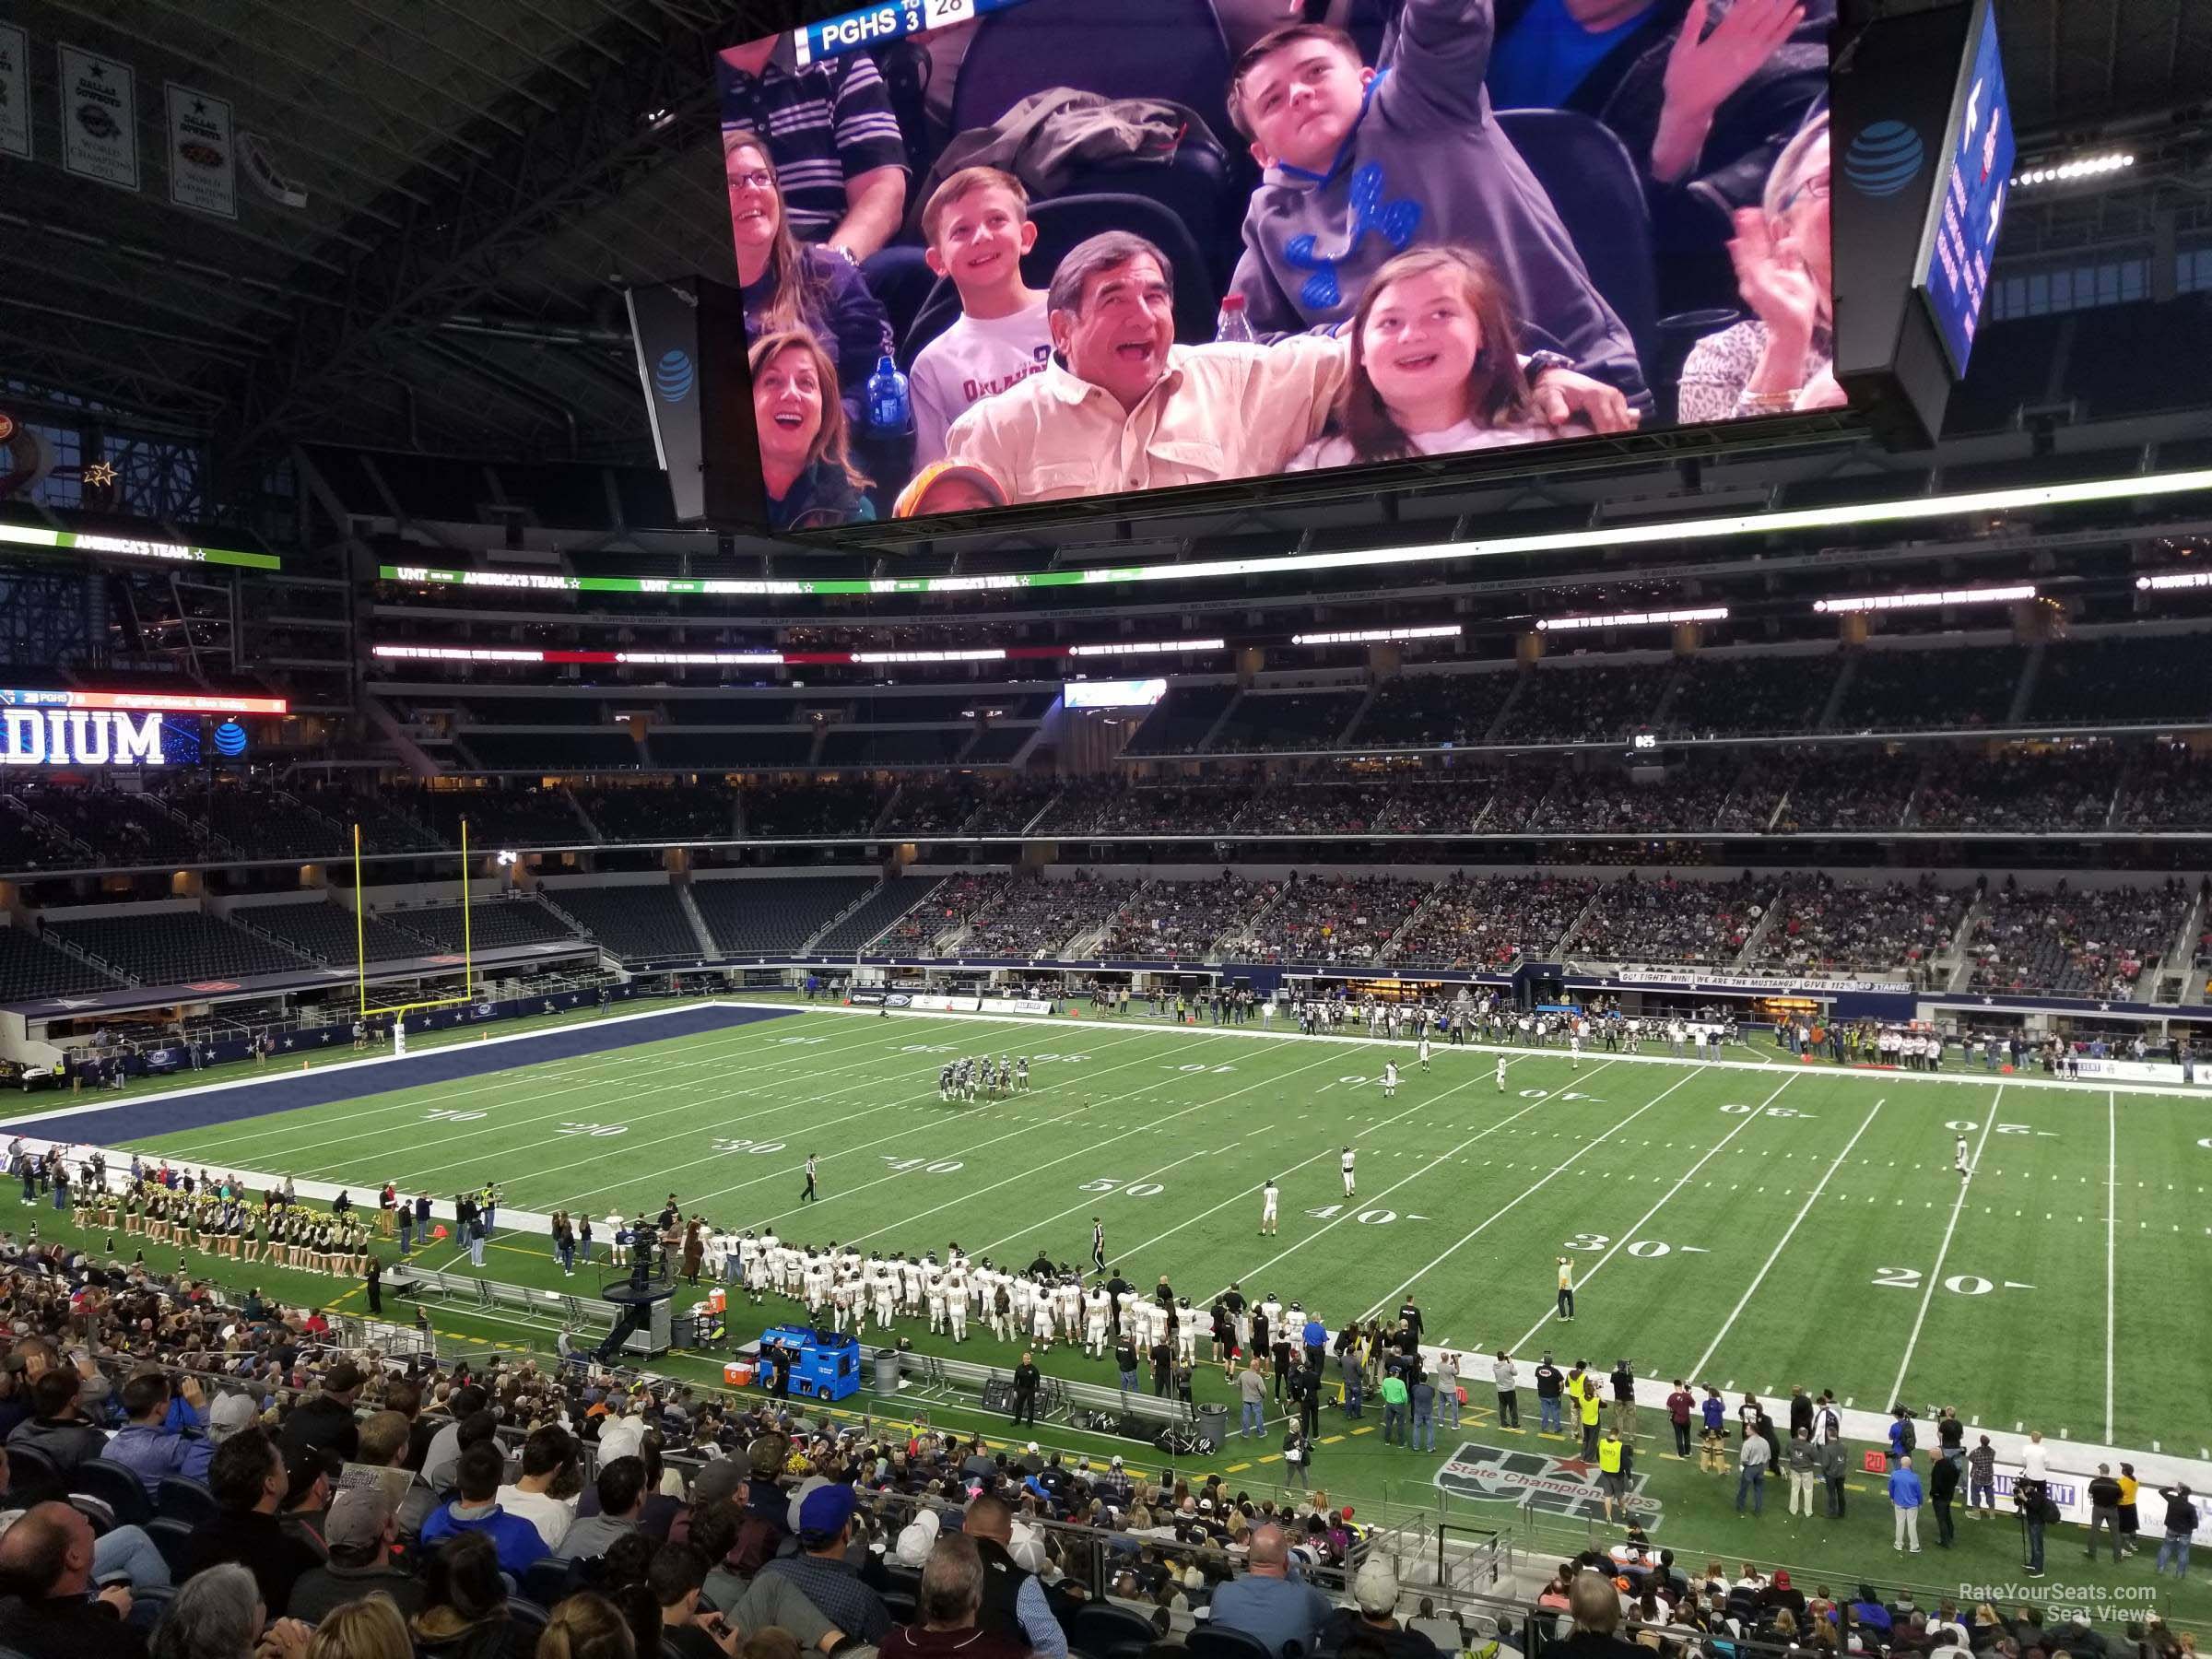 section c232, row 10 seat view  for football - at&t stadium (cowboys stadium)